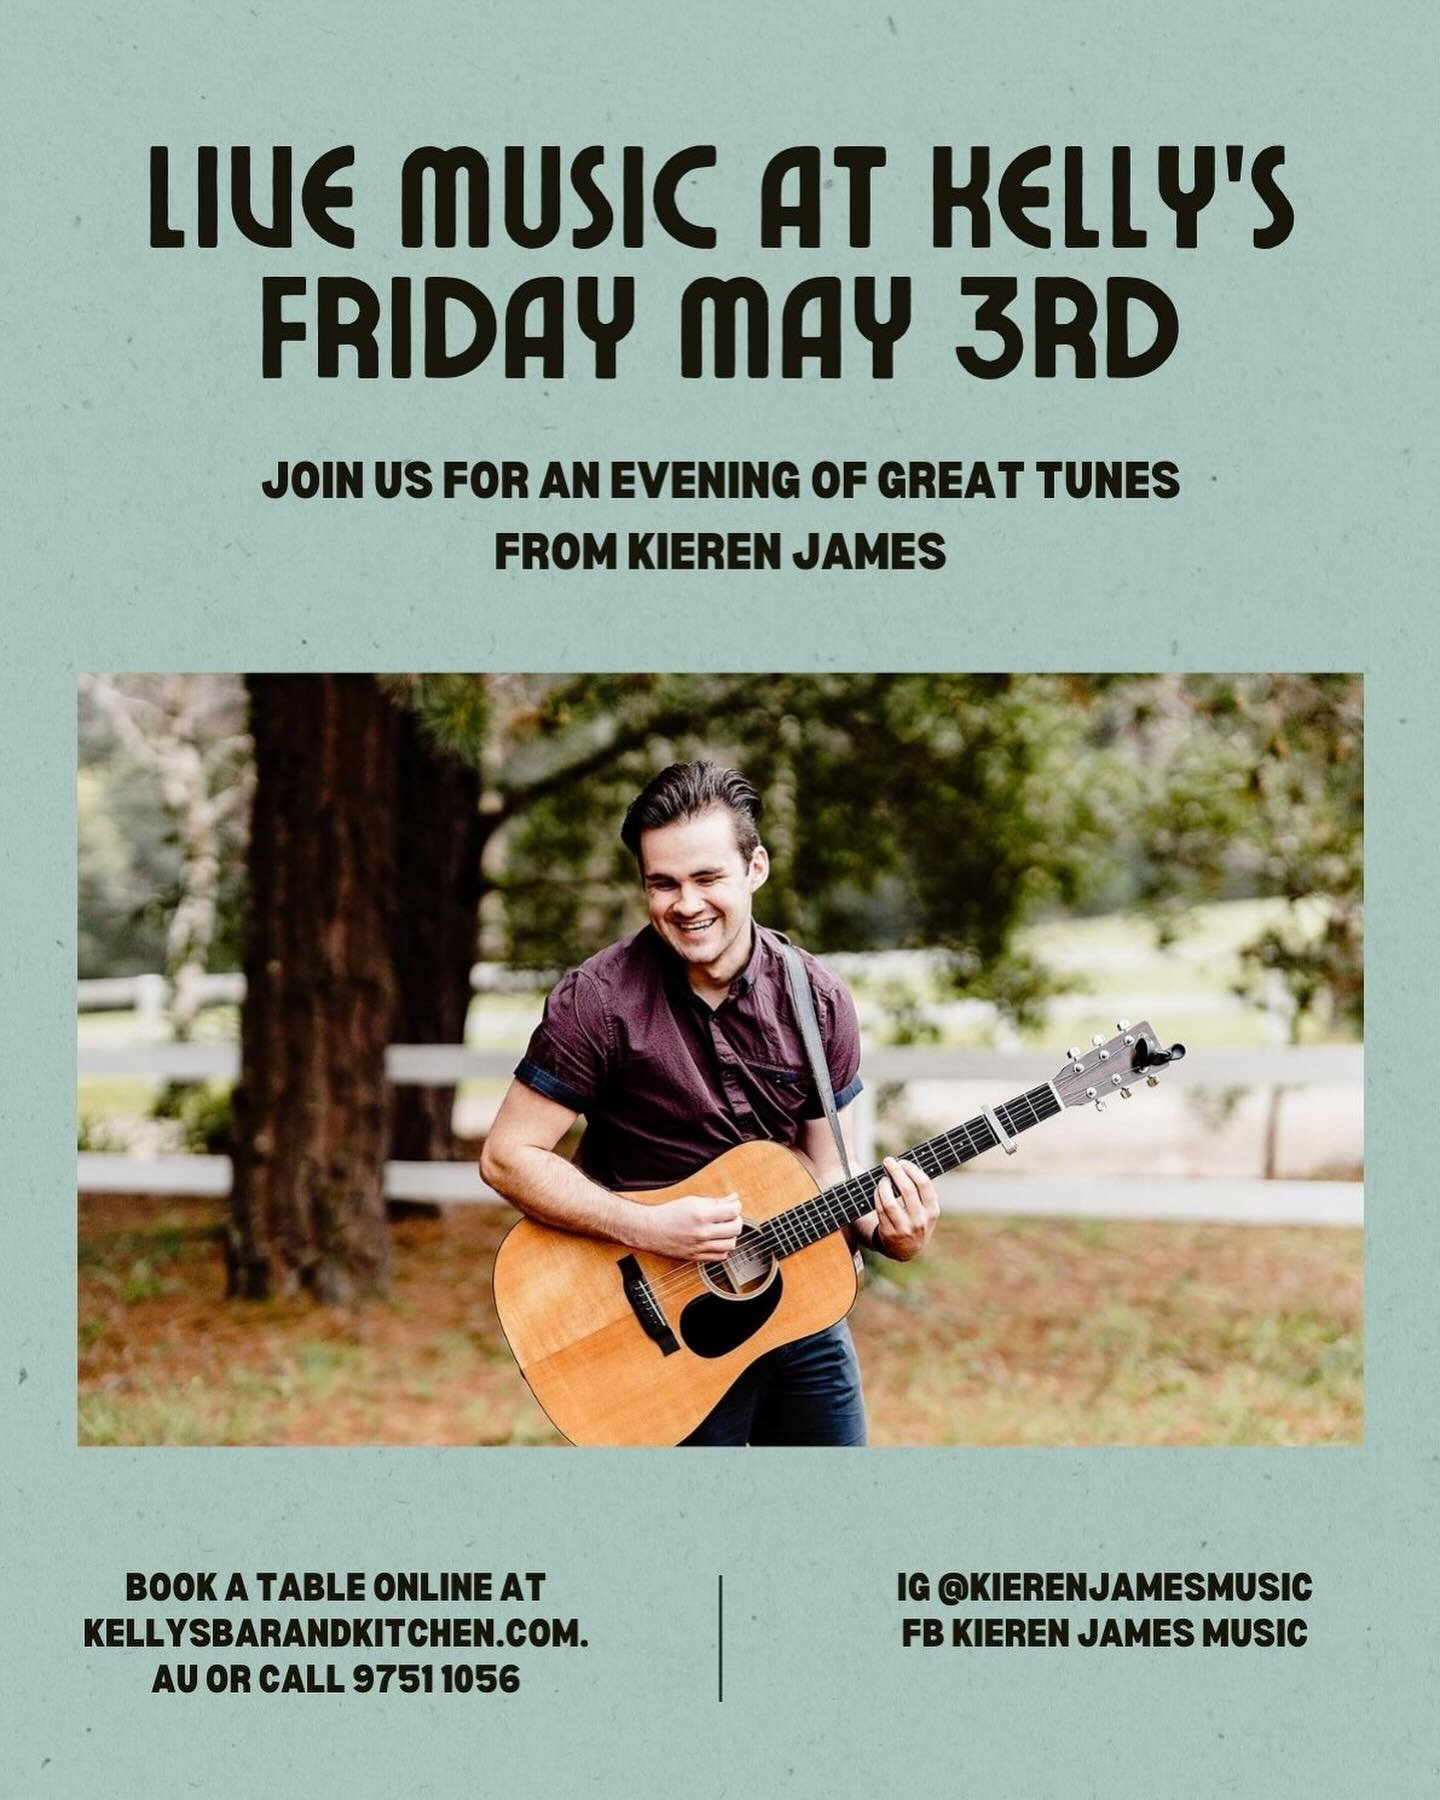 Reminder the awesome @kierenjamesmusic will be playing some tunes here at Kelly&rsquo;s tonight from 7pm - 9pm 🎸 

Call 9751 1056 or go to our website to make a booking